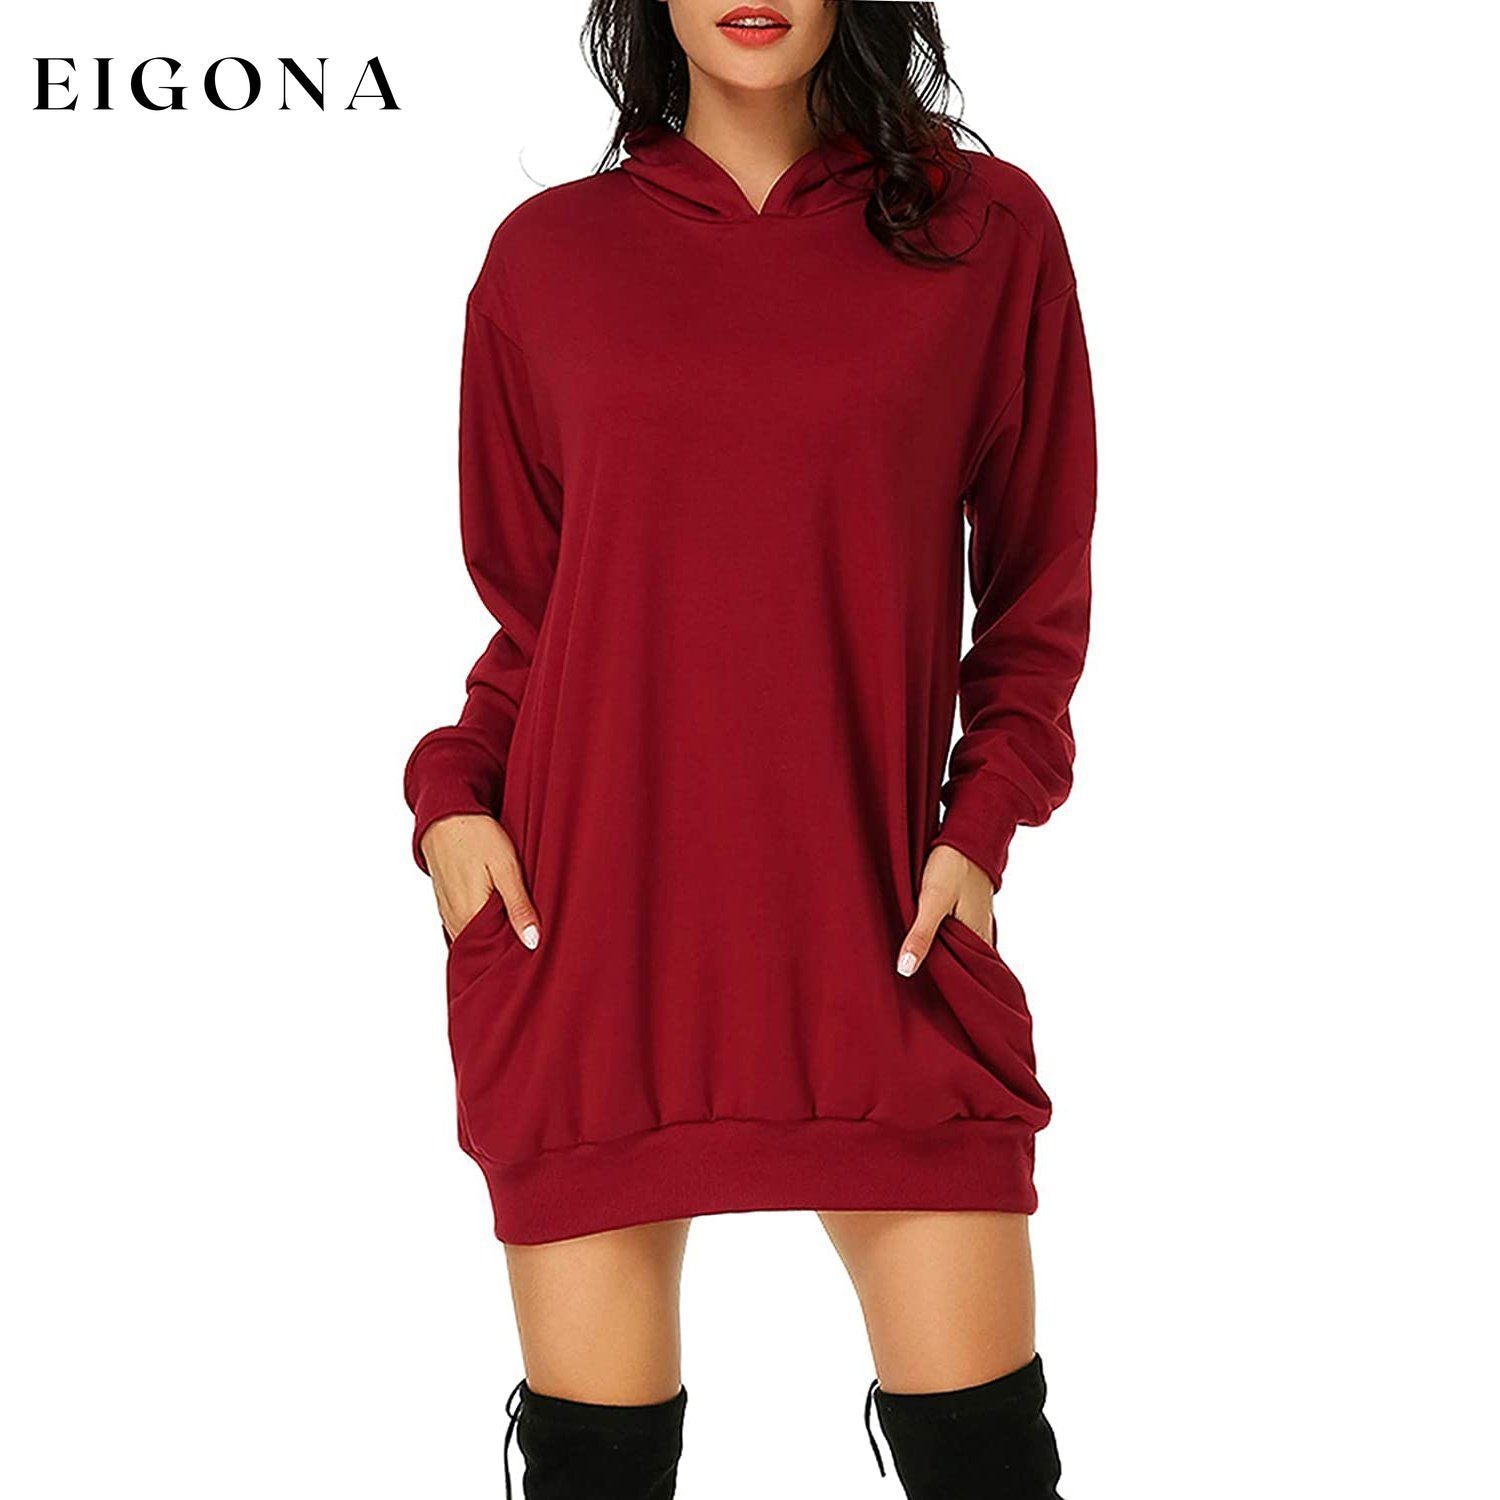 Women's Long Sleeve Hooded Pockets Pullover Hoodie Dress Tunic Sweatshirt Wine Red __stock:50 casual dresses clothes dresses refund_fee:1200